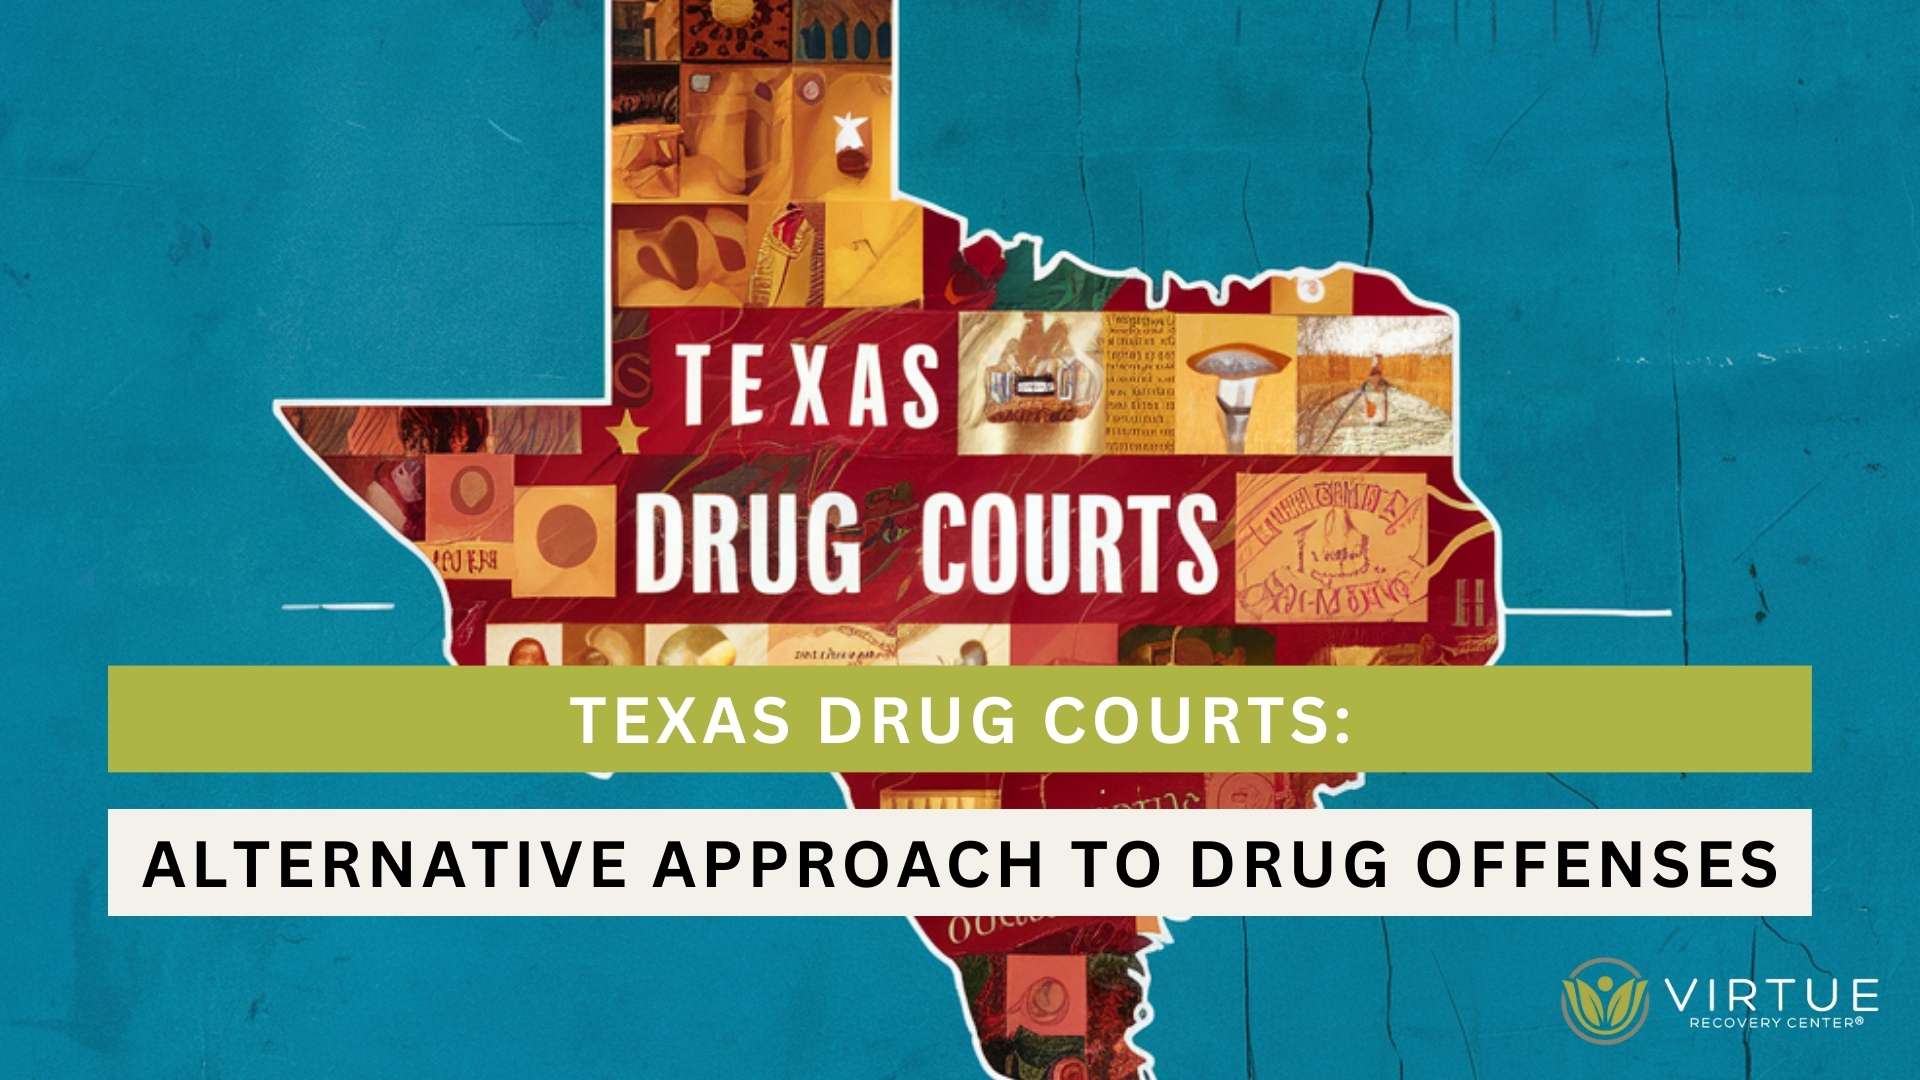 Texas Drug Courts An Alternative Approach to Drug Offenses